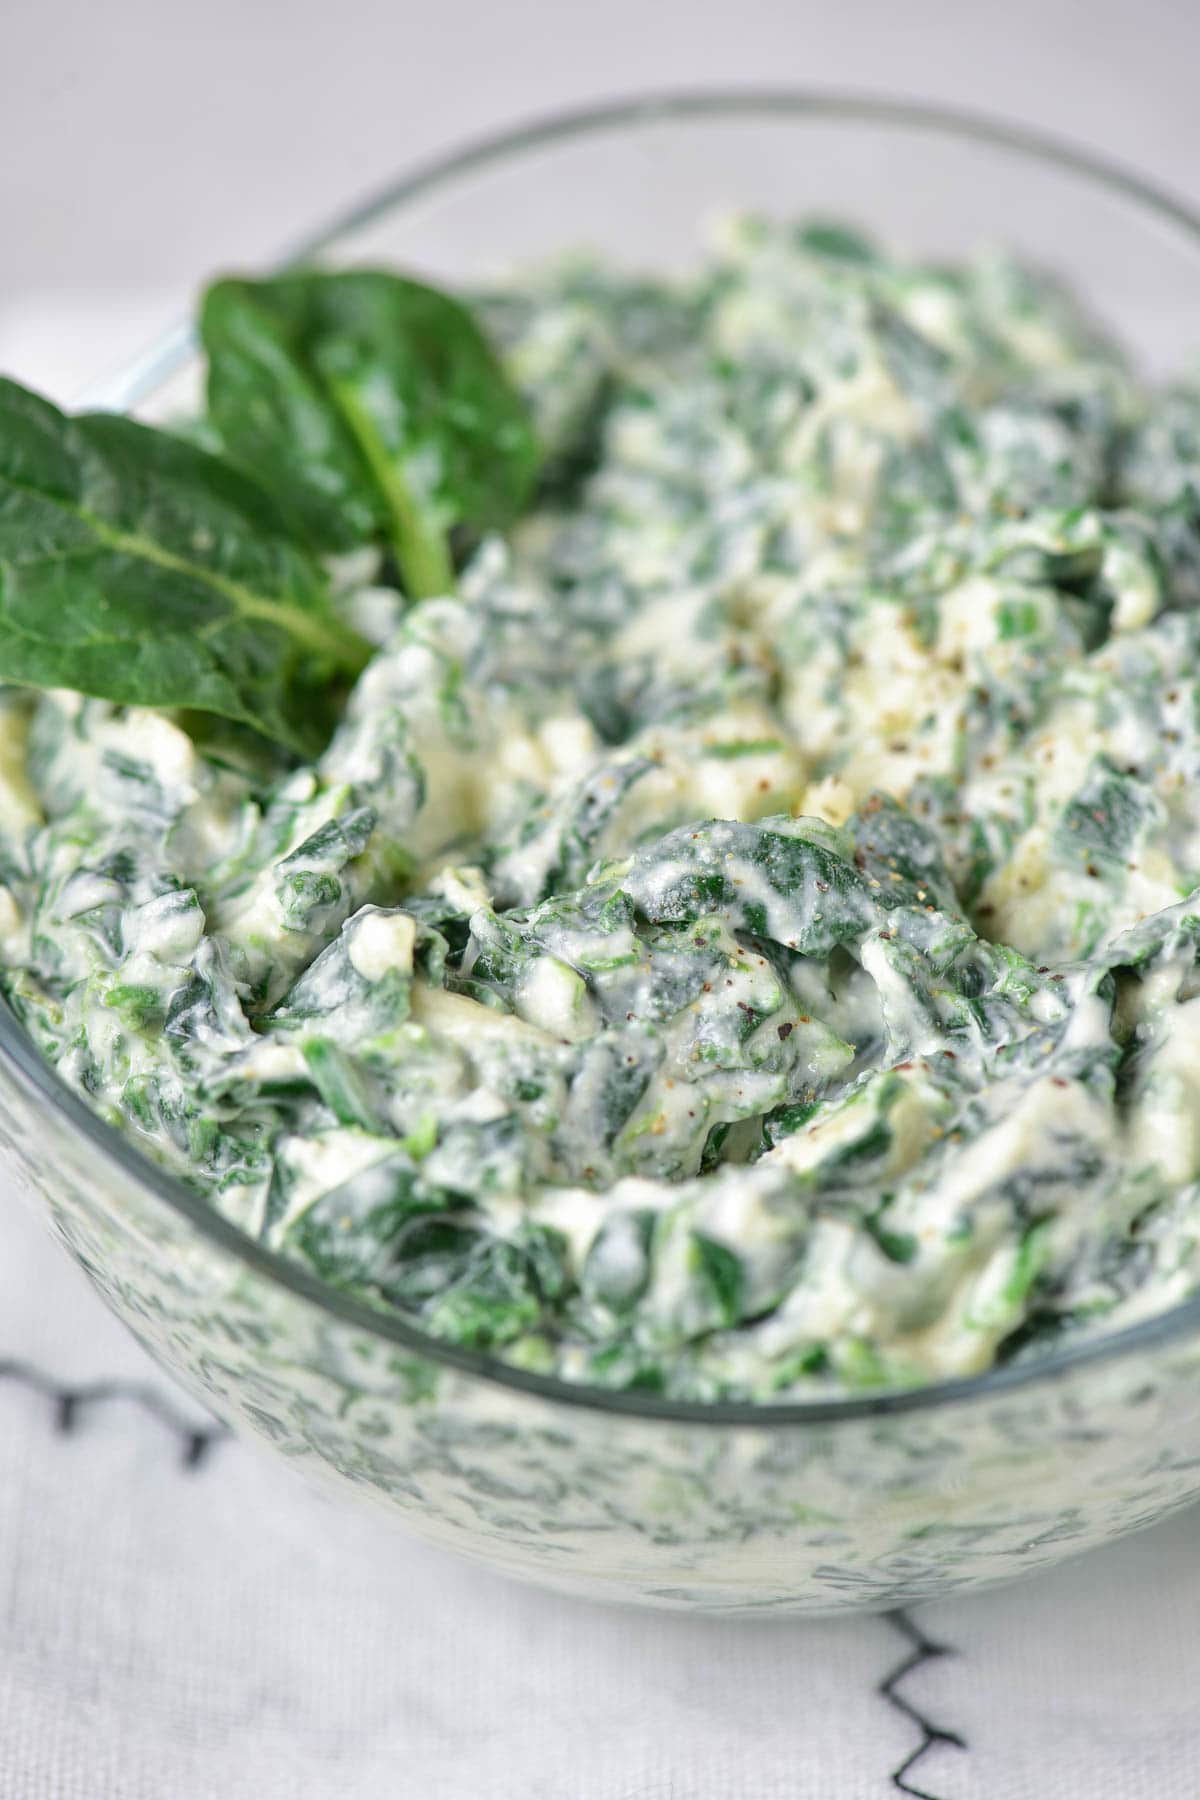 Spinach dip up close